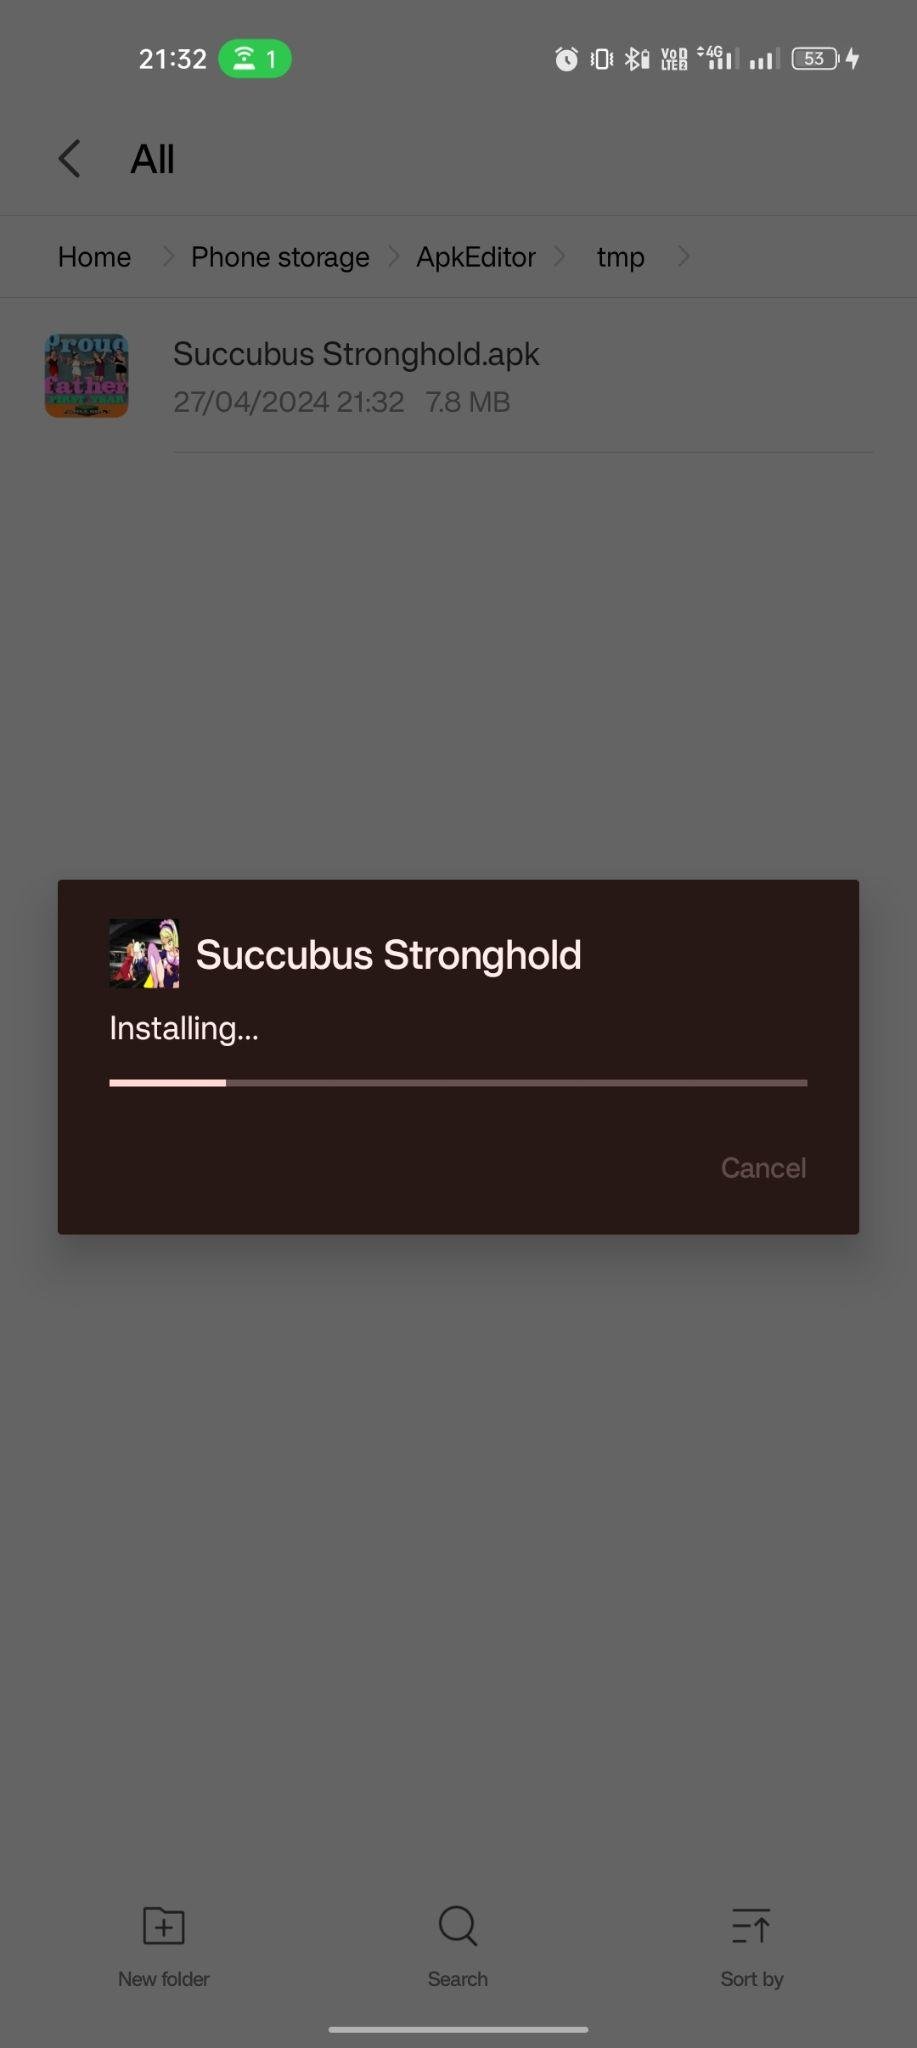 Succubus Stronghold apk installing